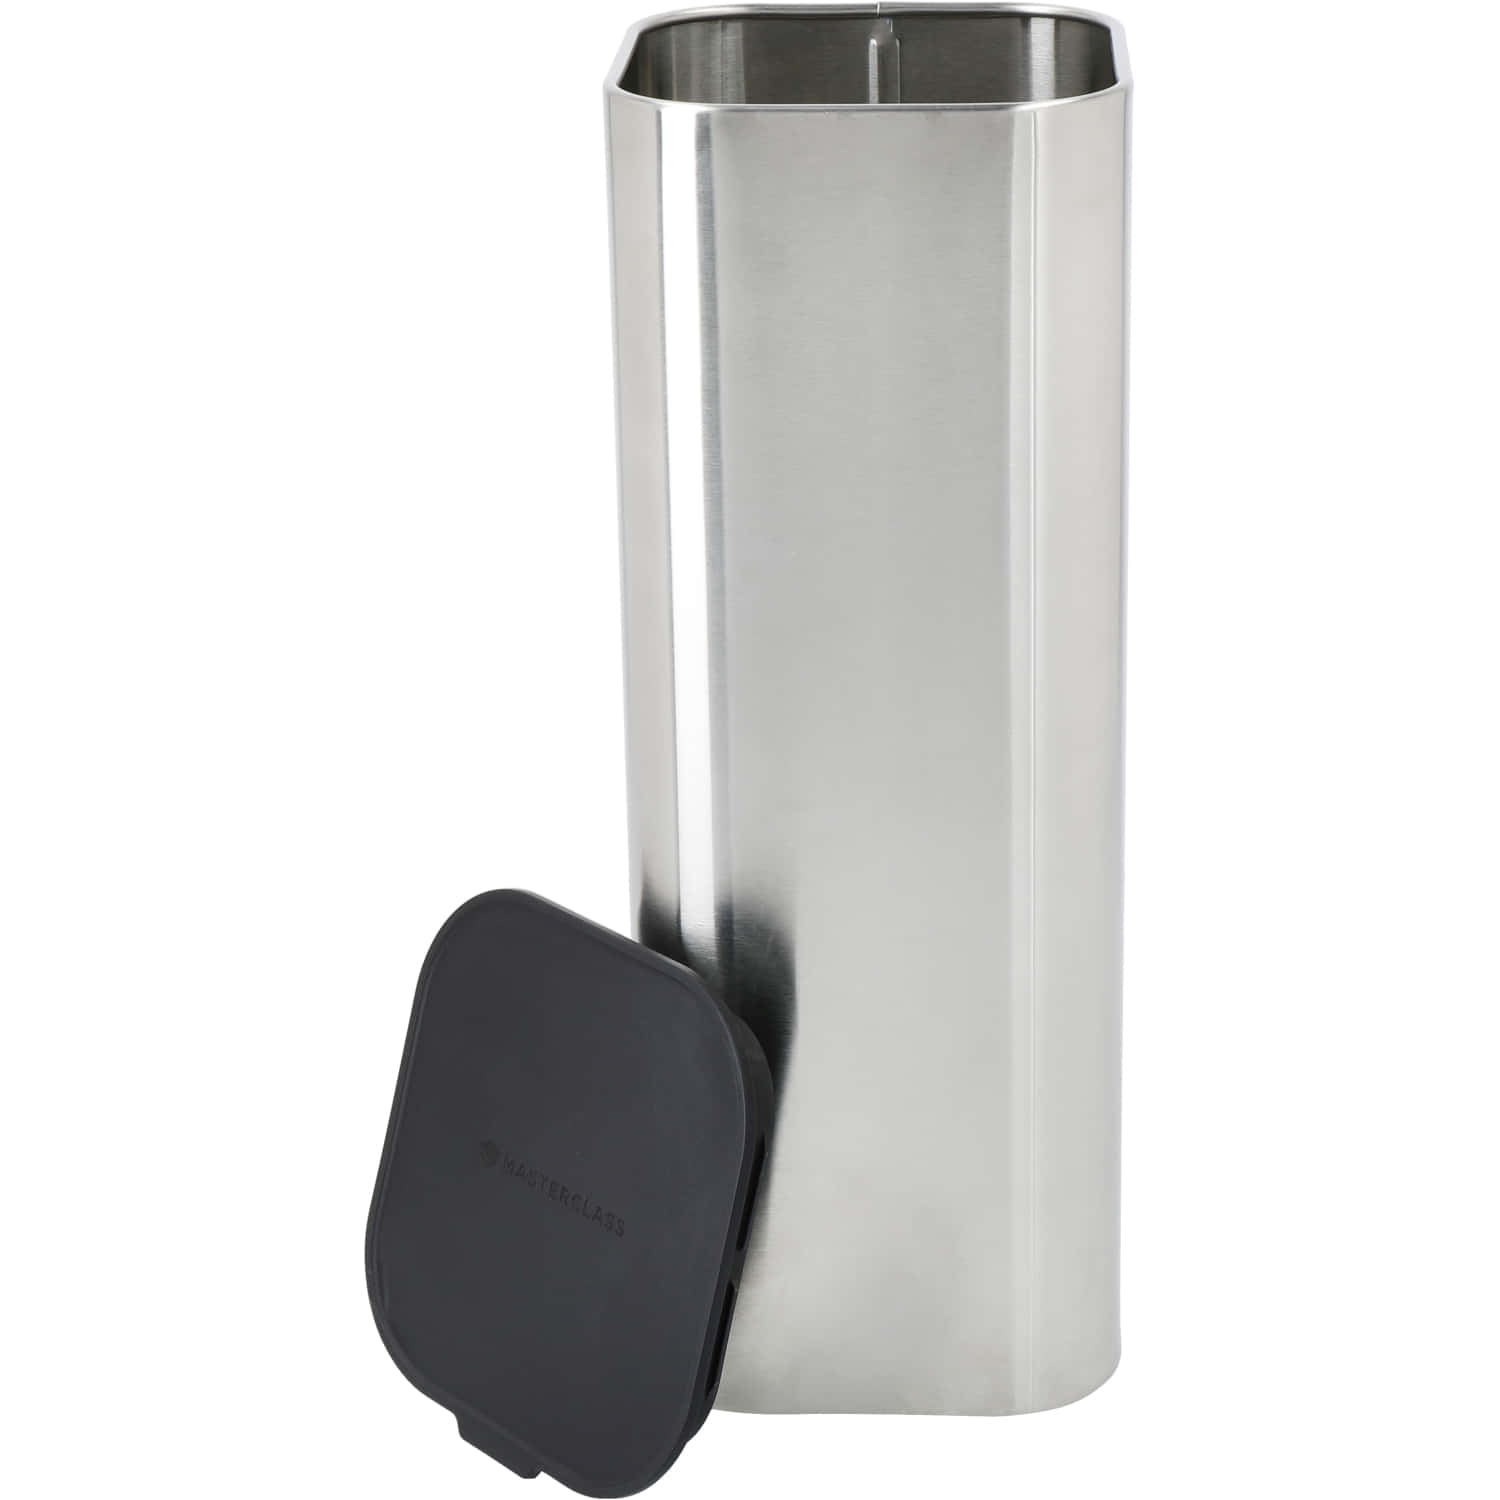 MasterClass Stainless Steel Antimicrobial Storage Container 29cm